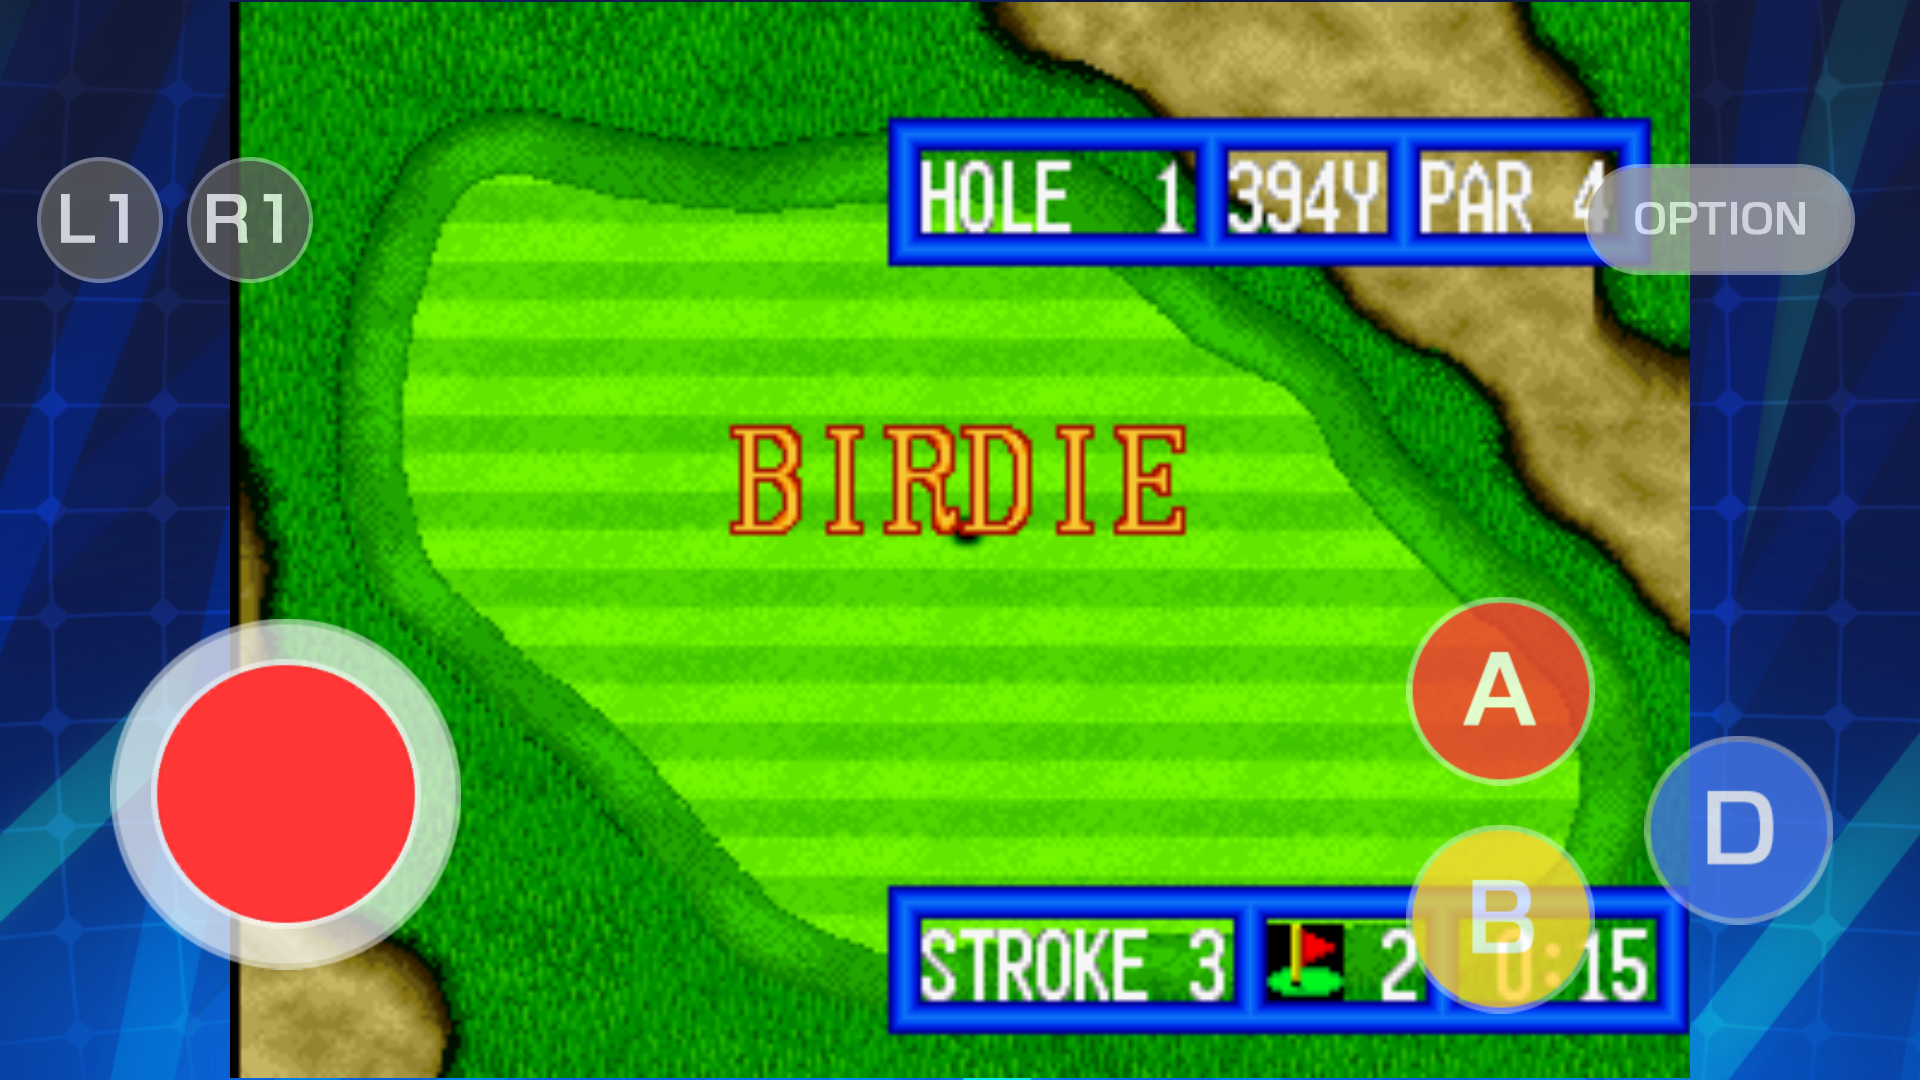 Classic Golf Game 'Top Player's Golf' ACA NeoGeo From SNK and